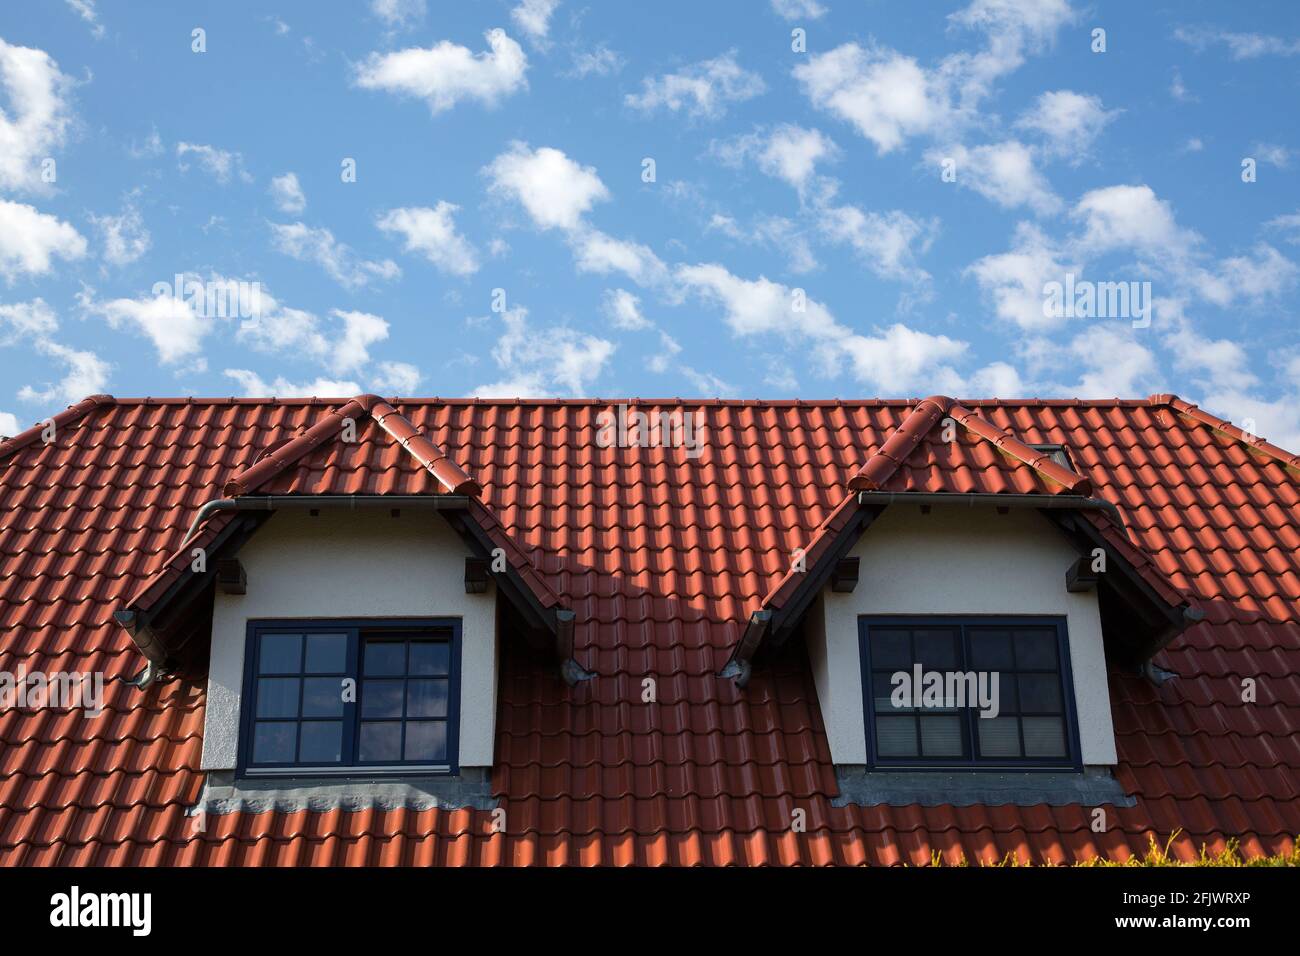 Red tiled roof with two dormers in front of a blue sky with clouds Stock Photo